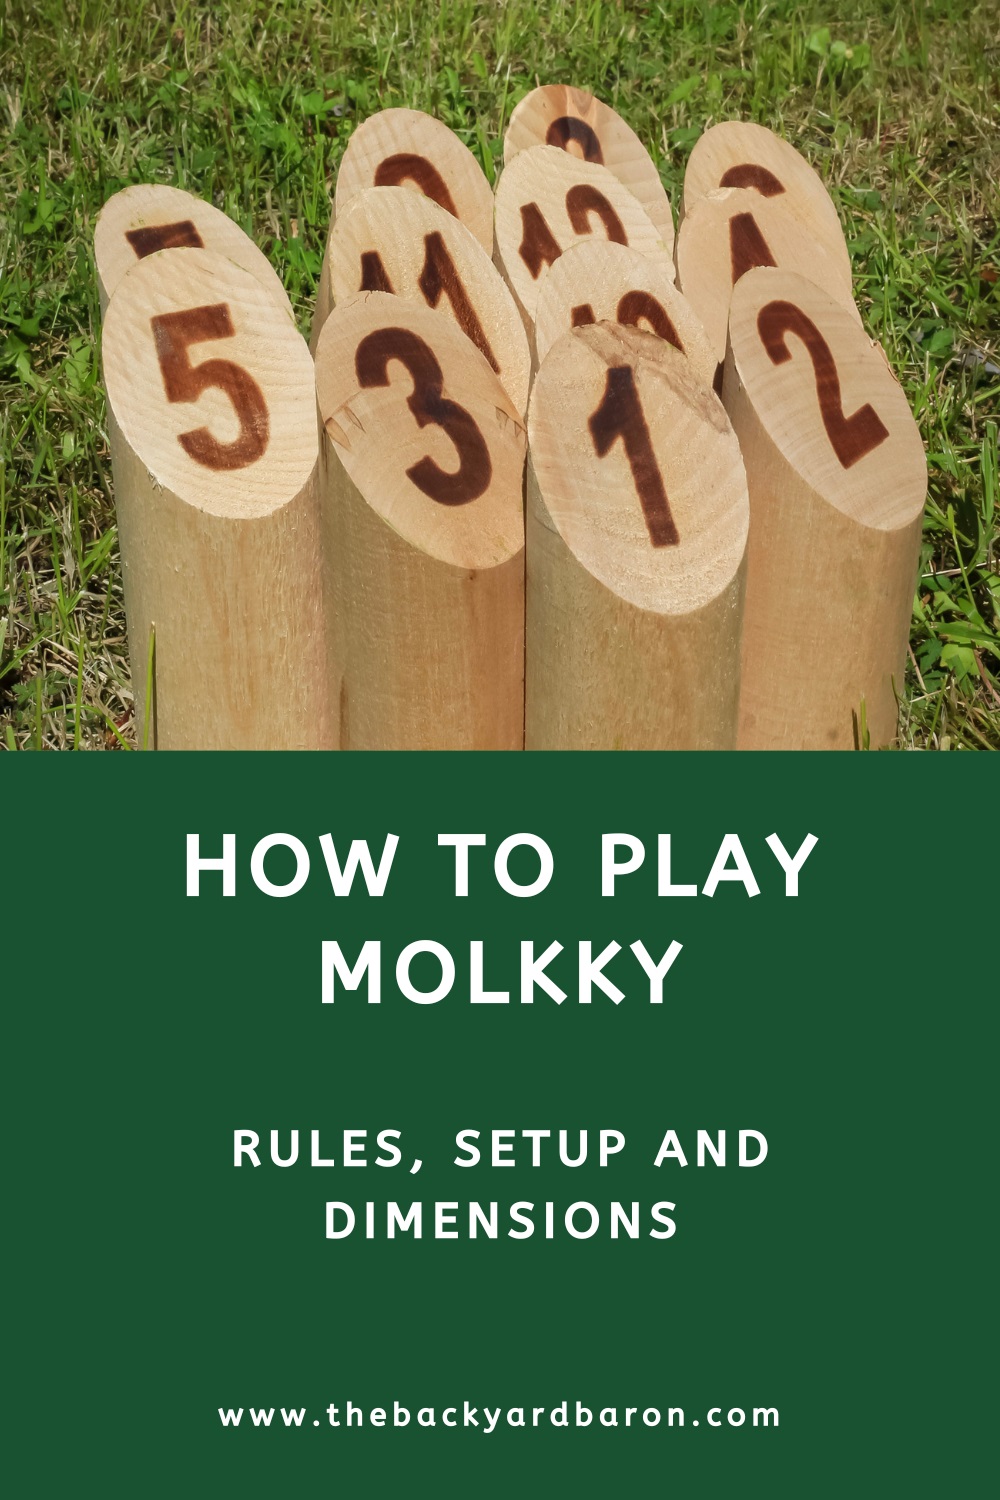 How to play molkky (rules, setup and dimensions)